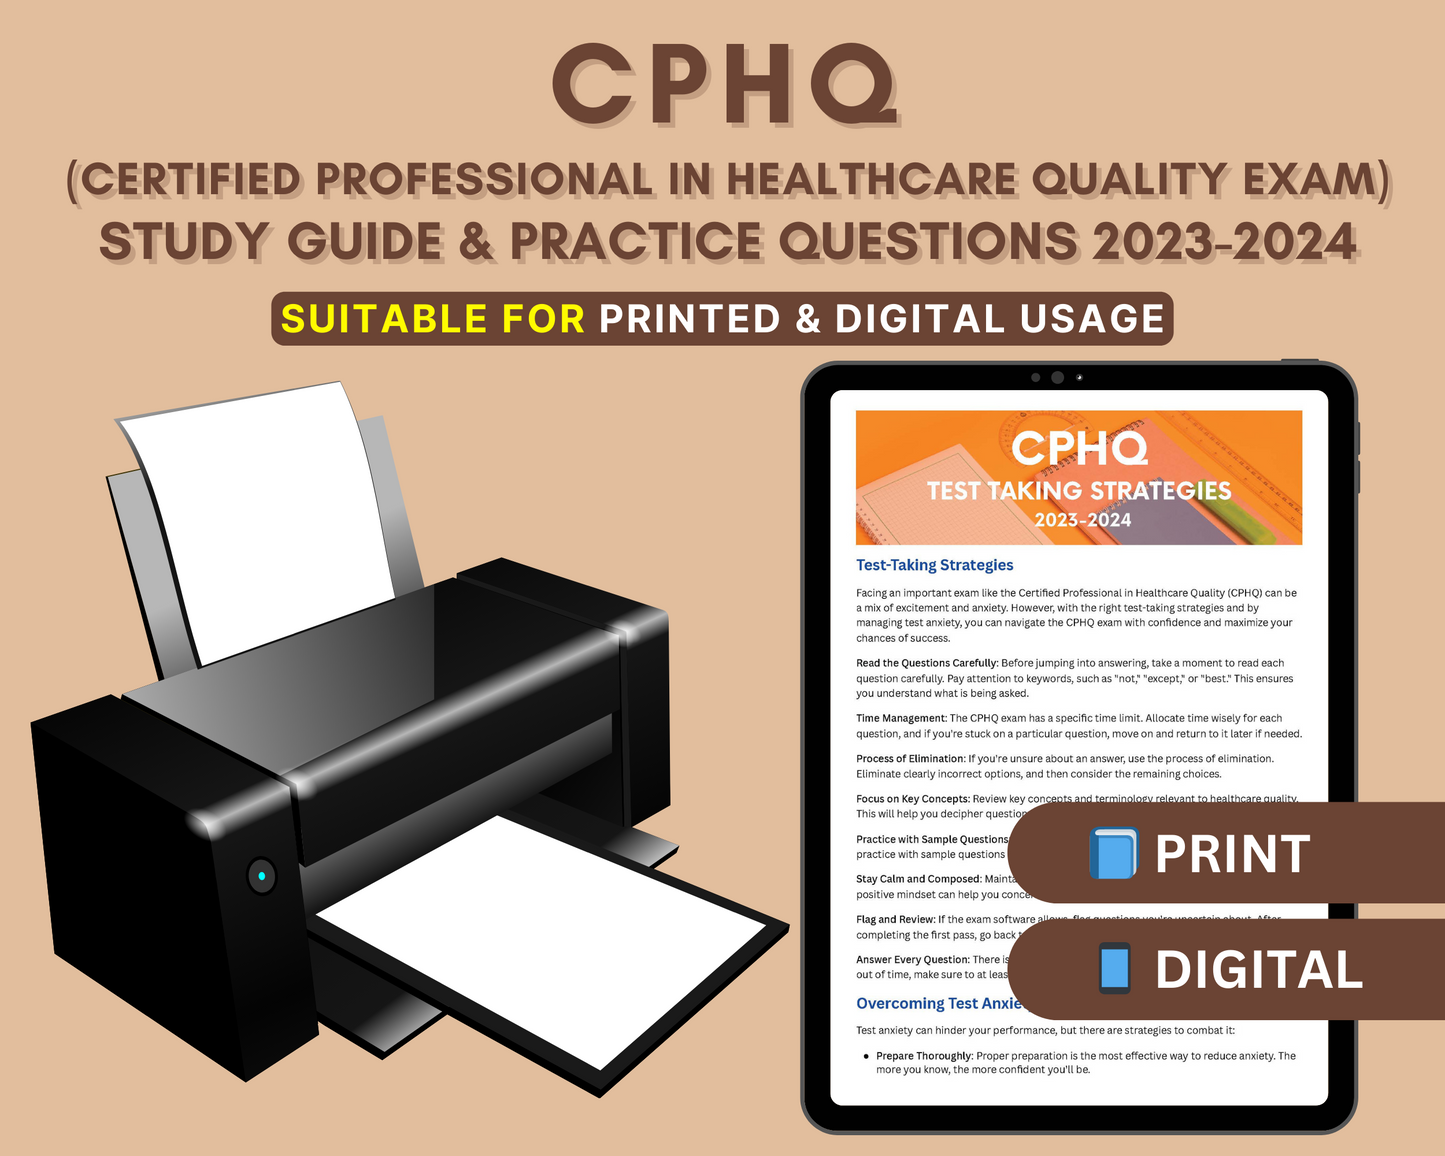 CPHQ Study Guide 2023-2024: In-Depth Content Review, Practice Tests & Exam Tips for Healthcare Quality Certification